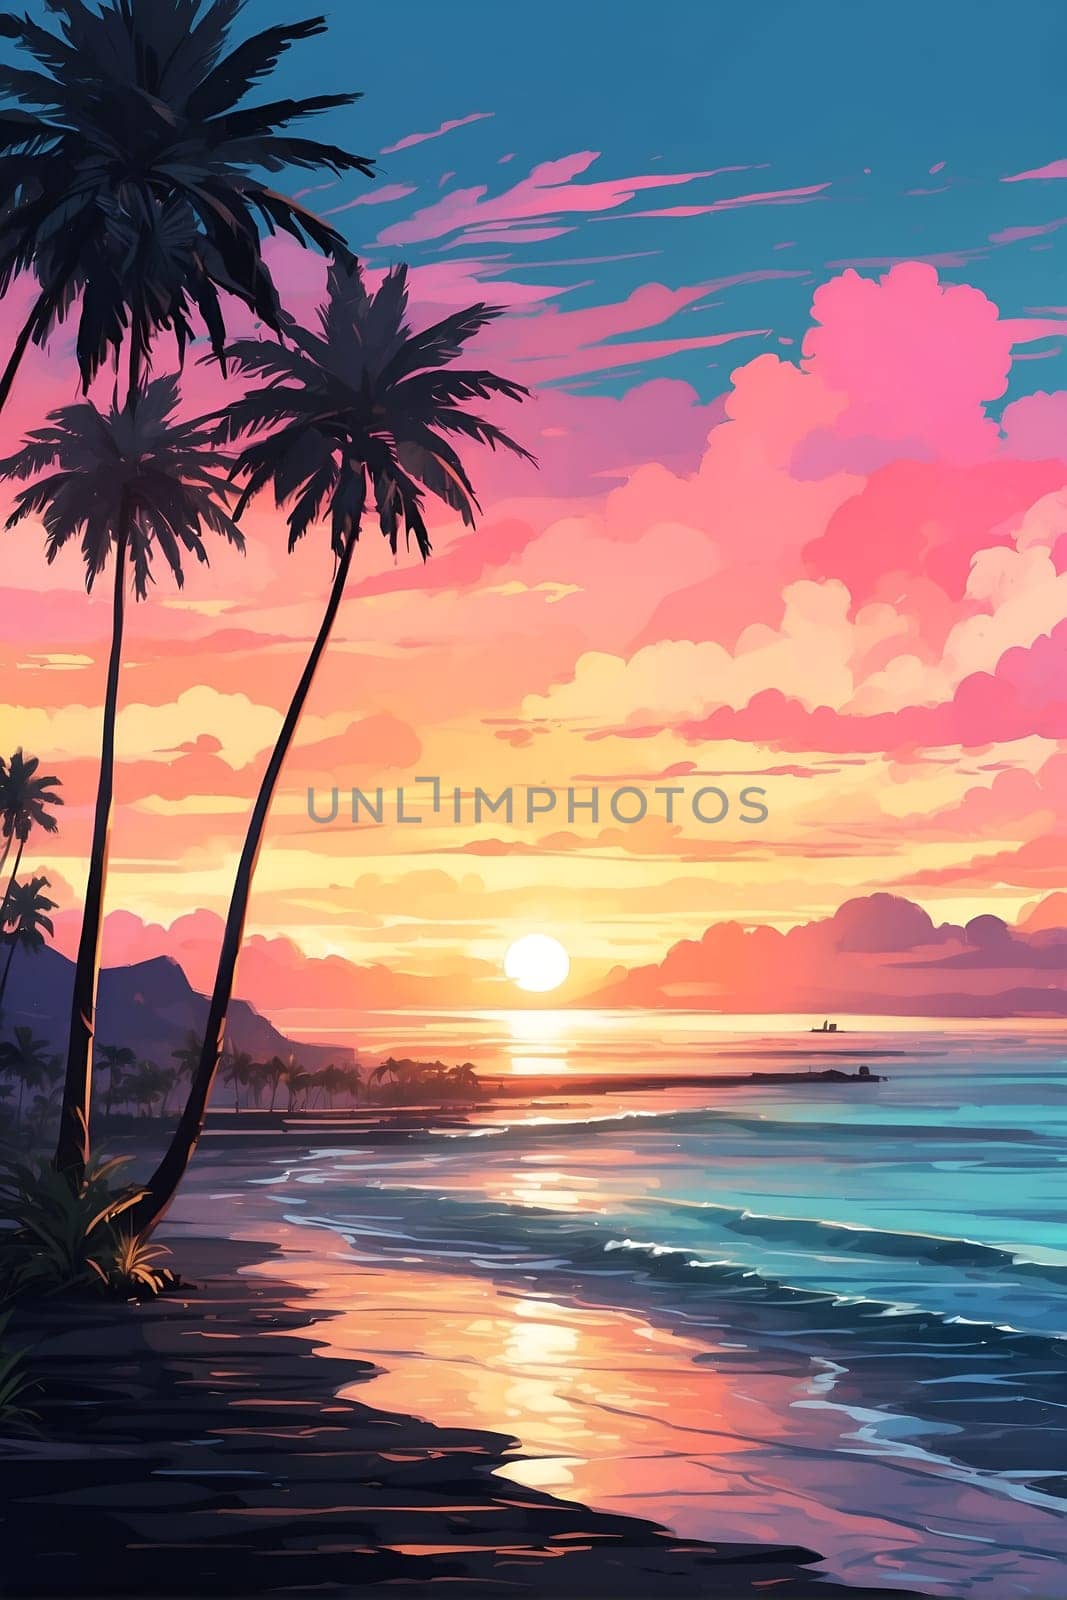 This photo captures a realistic painting of a tropical sunset with palm trees, showcasing vibrant colors and a serene atmosphere.